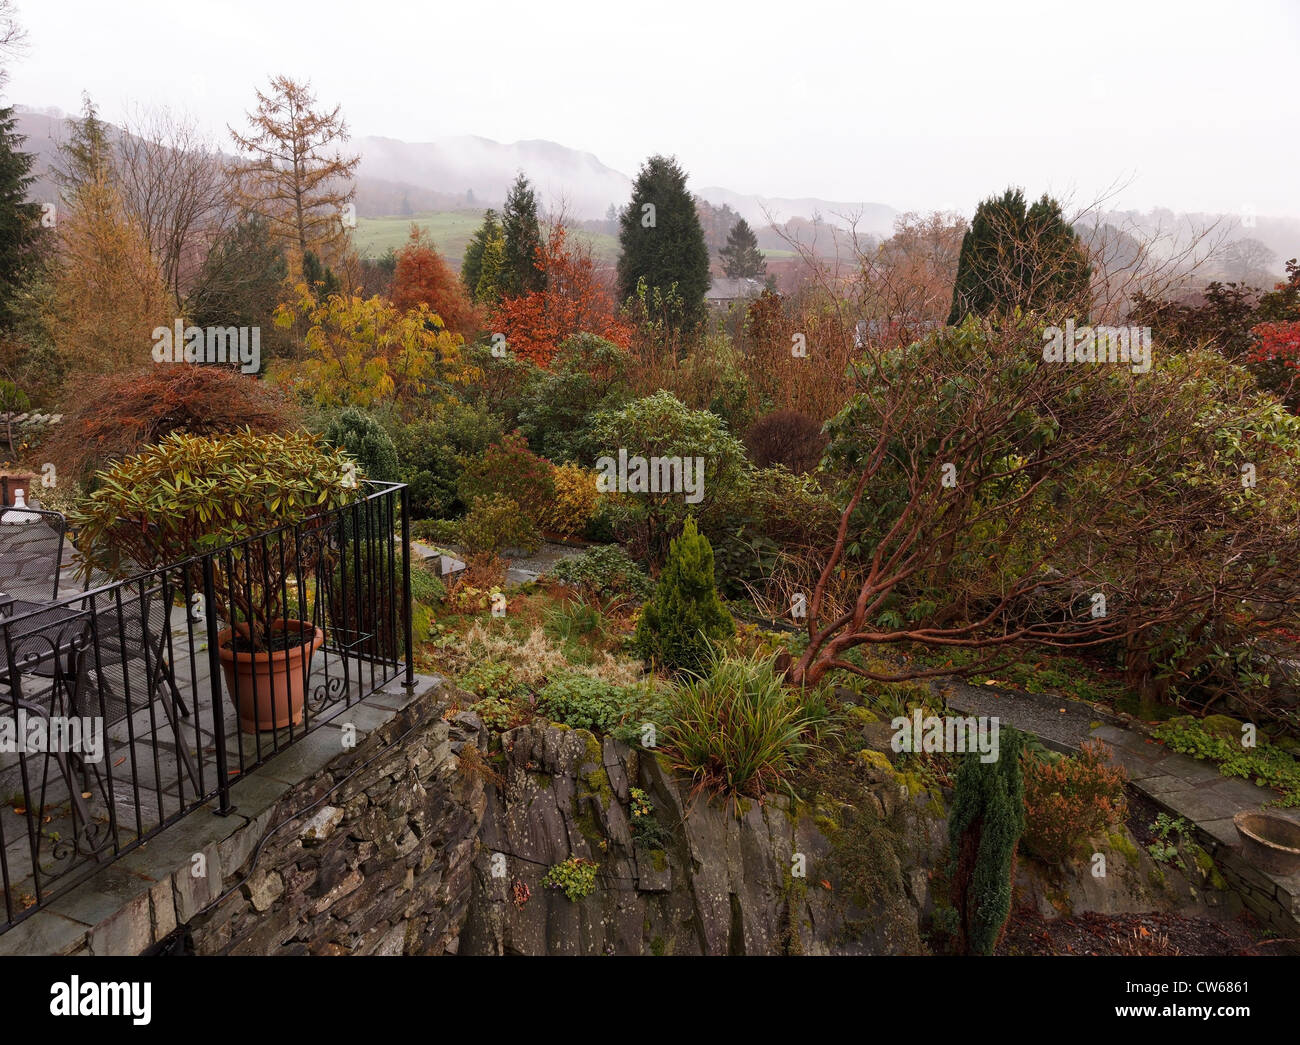 Rock garden with Autumn colour in morning mist, Elterwater, Cumbria, England, UK Stock Photo